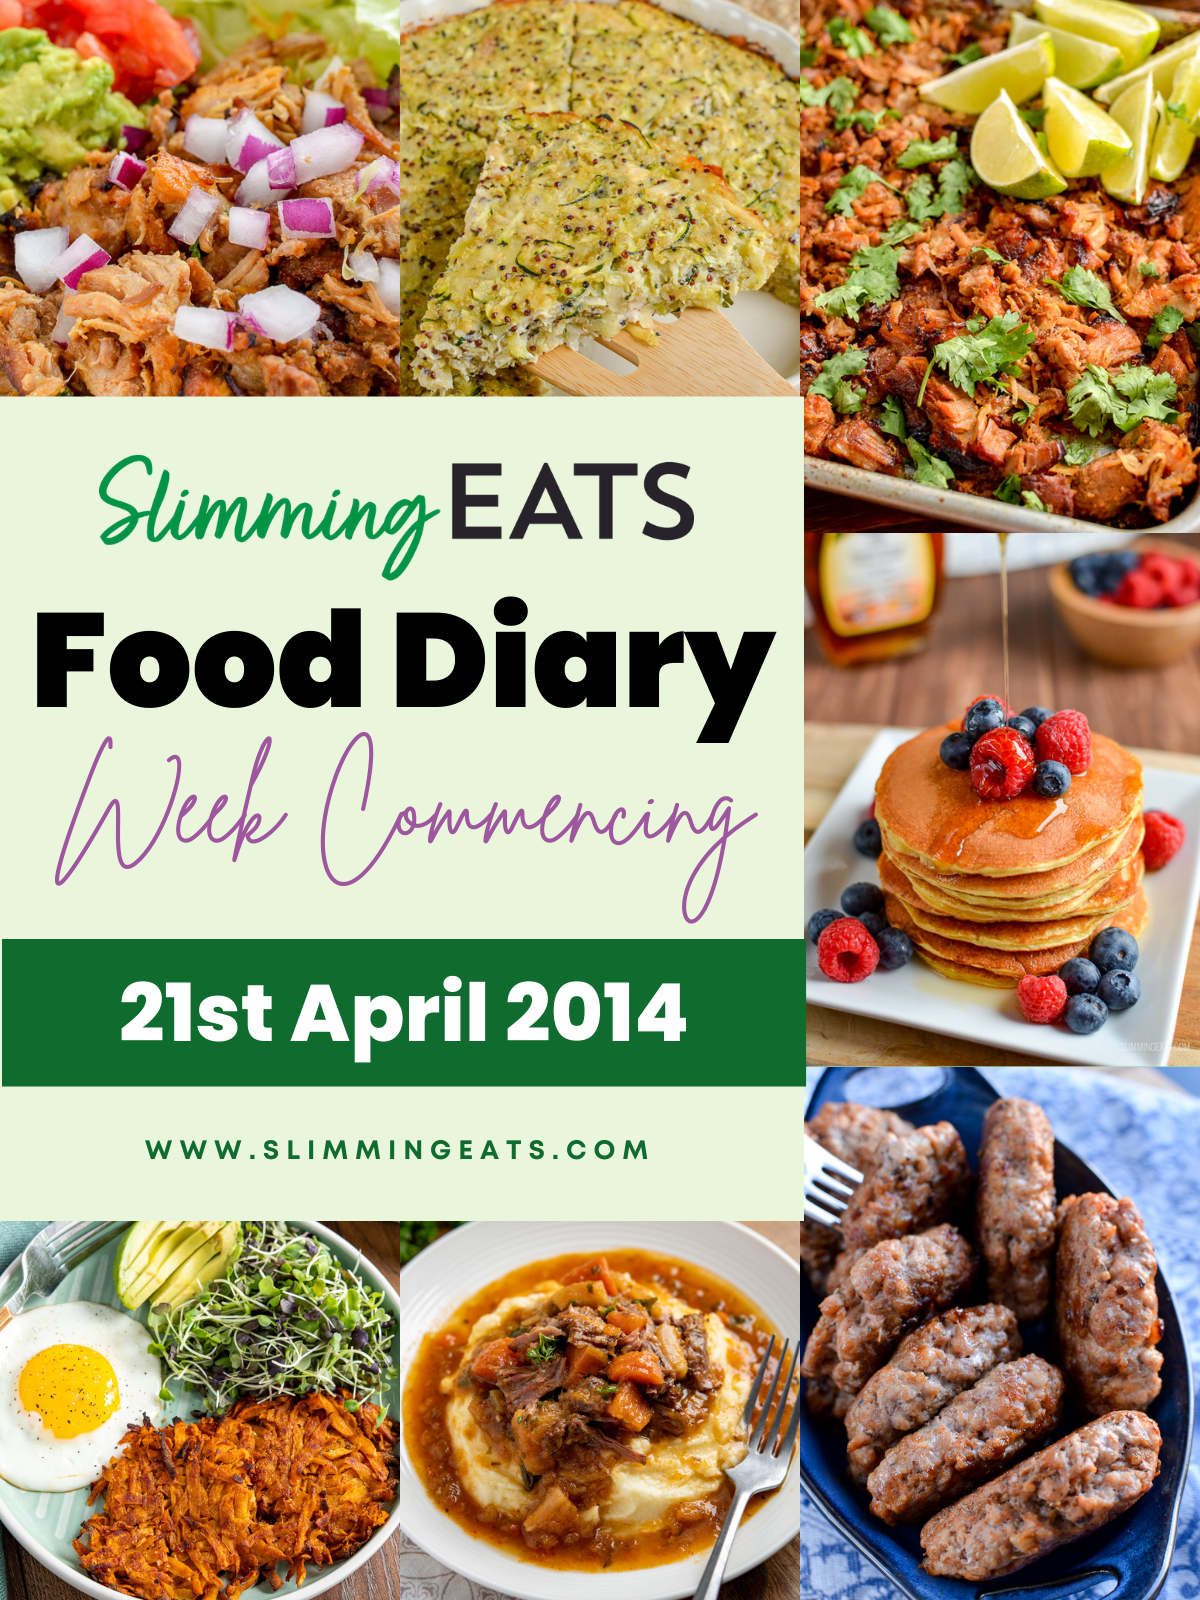 Slimming Eats Food Diary - week commencing 21st April 2014 